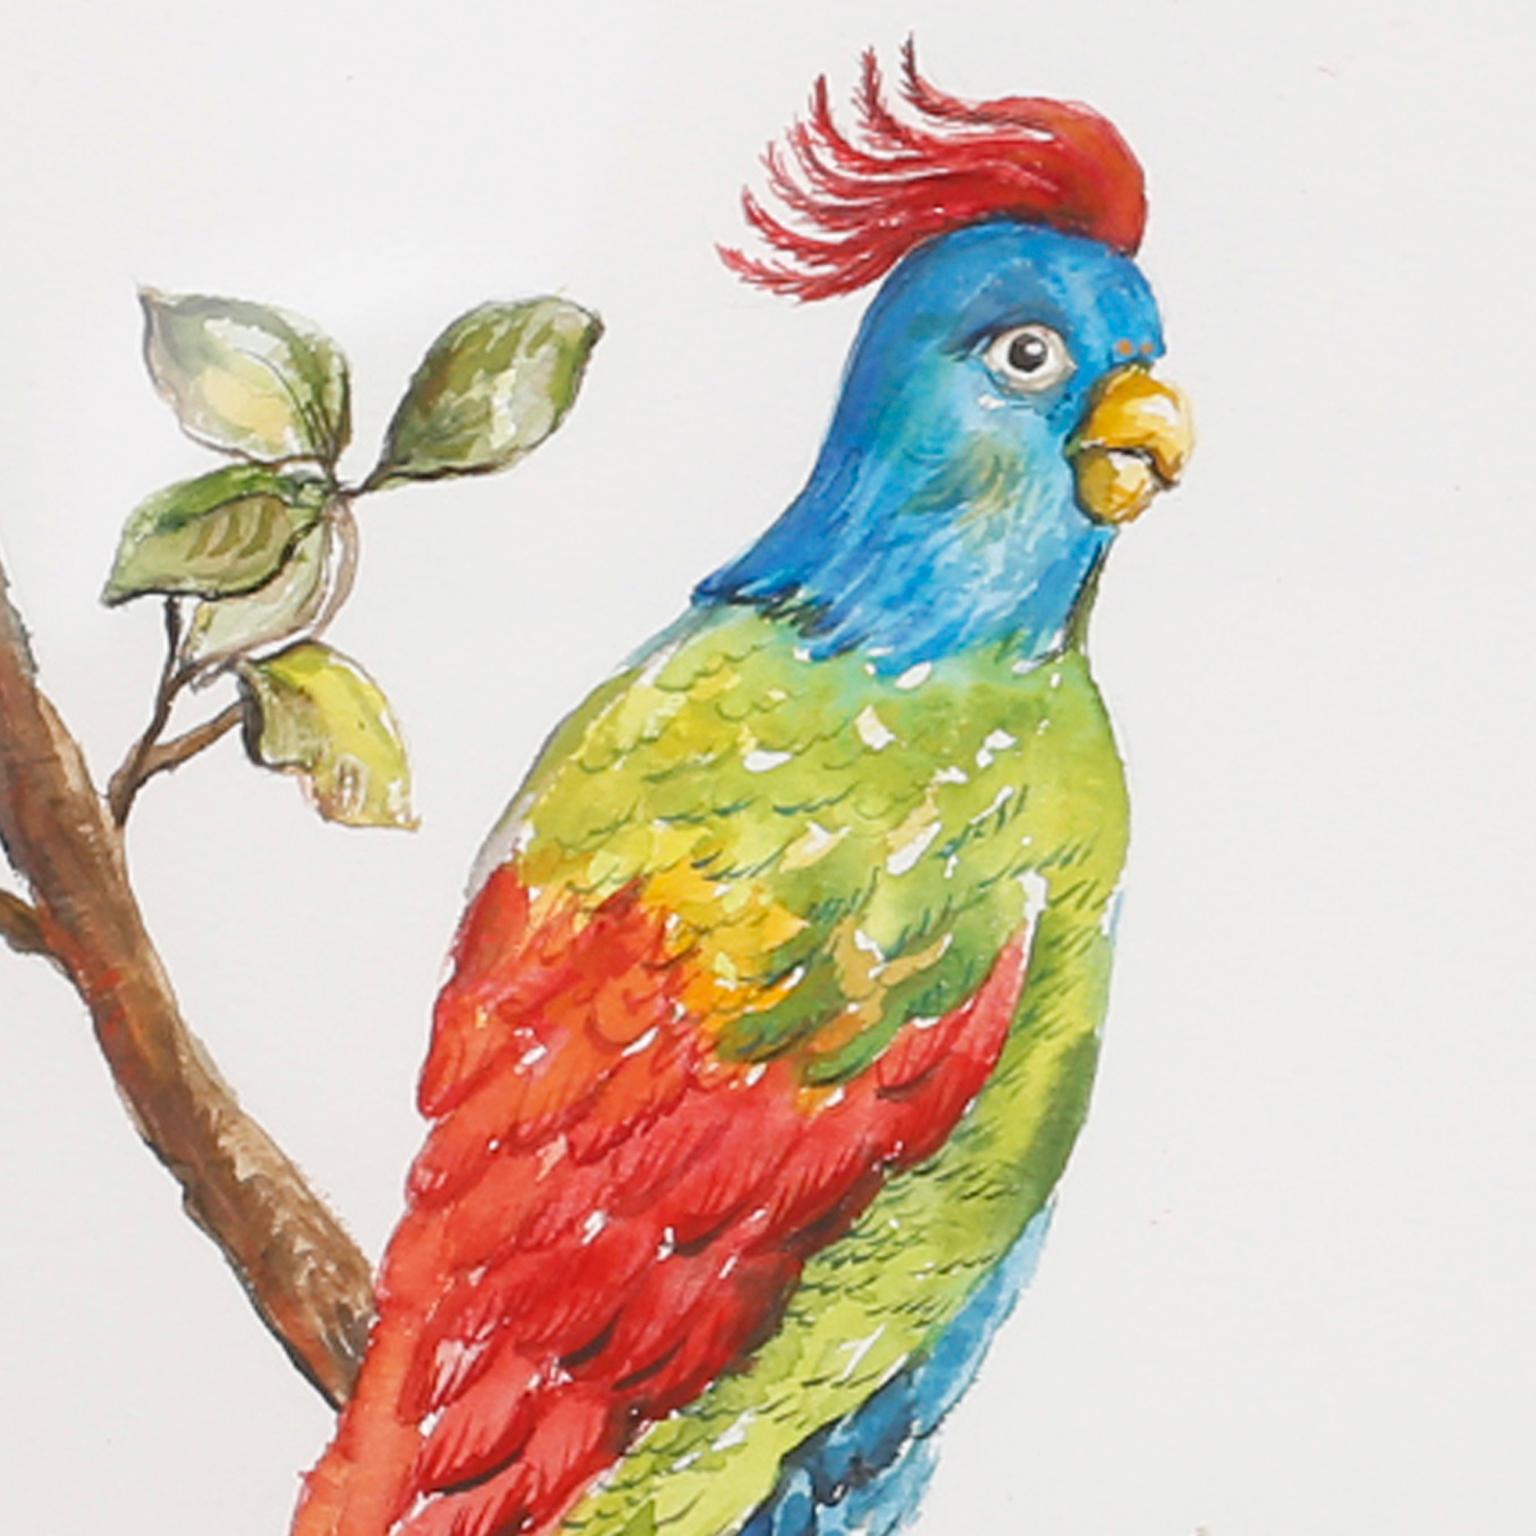 Set of Four Watercolor Paintings of Parrots 4